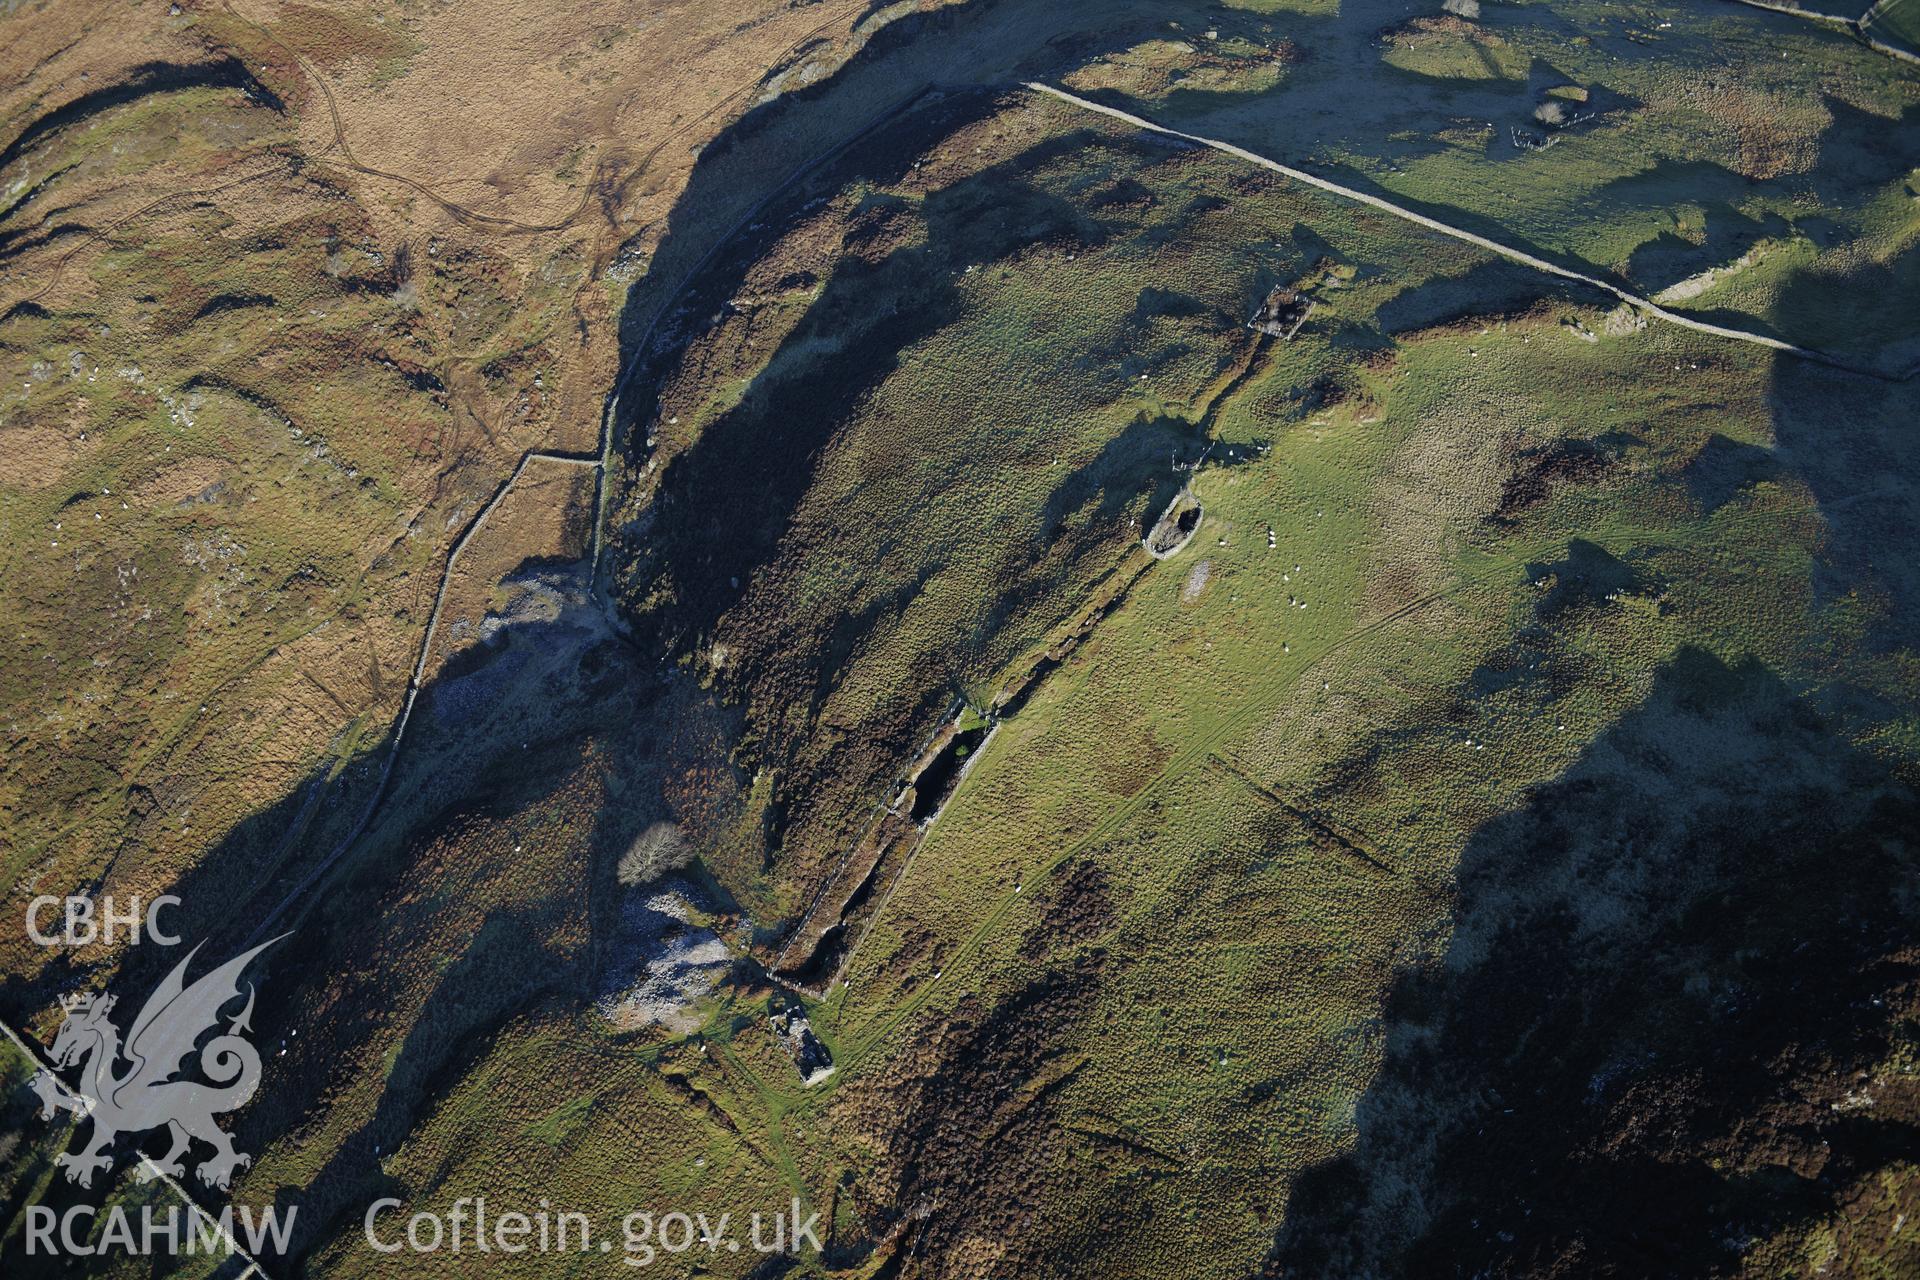 RCAHMW colour oblique photograph of Clogau gold mine. Taken by Toby Driver on 10/12/2012.